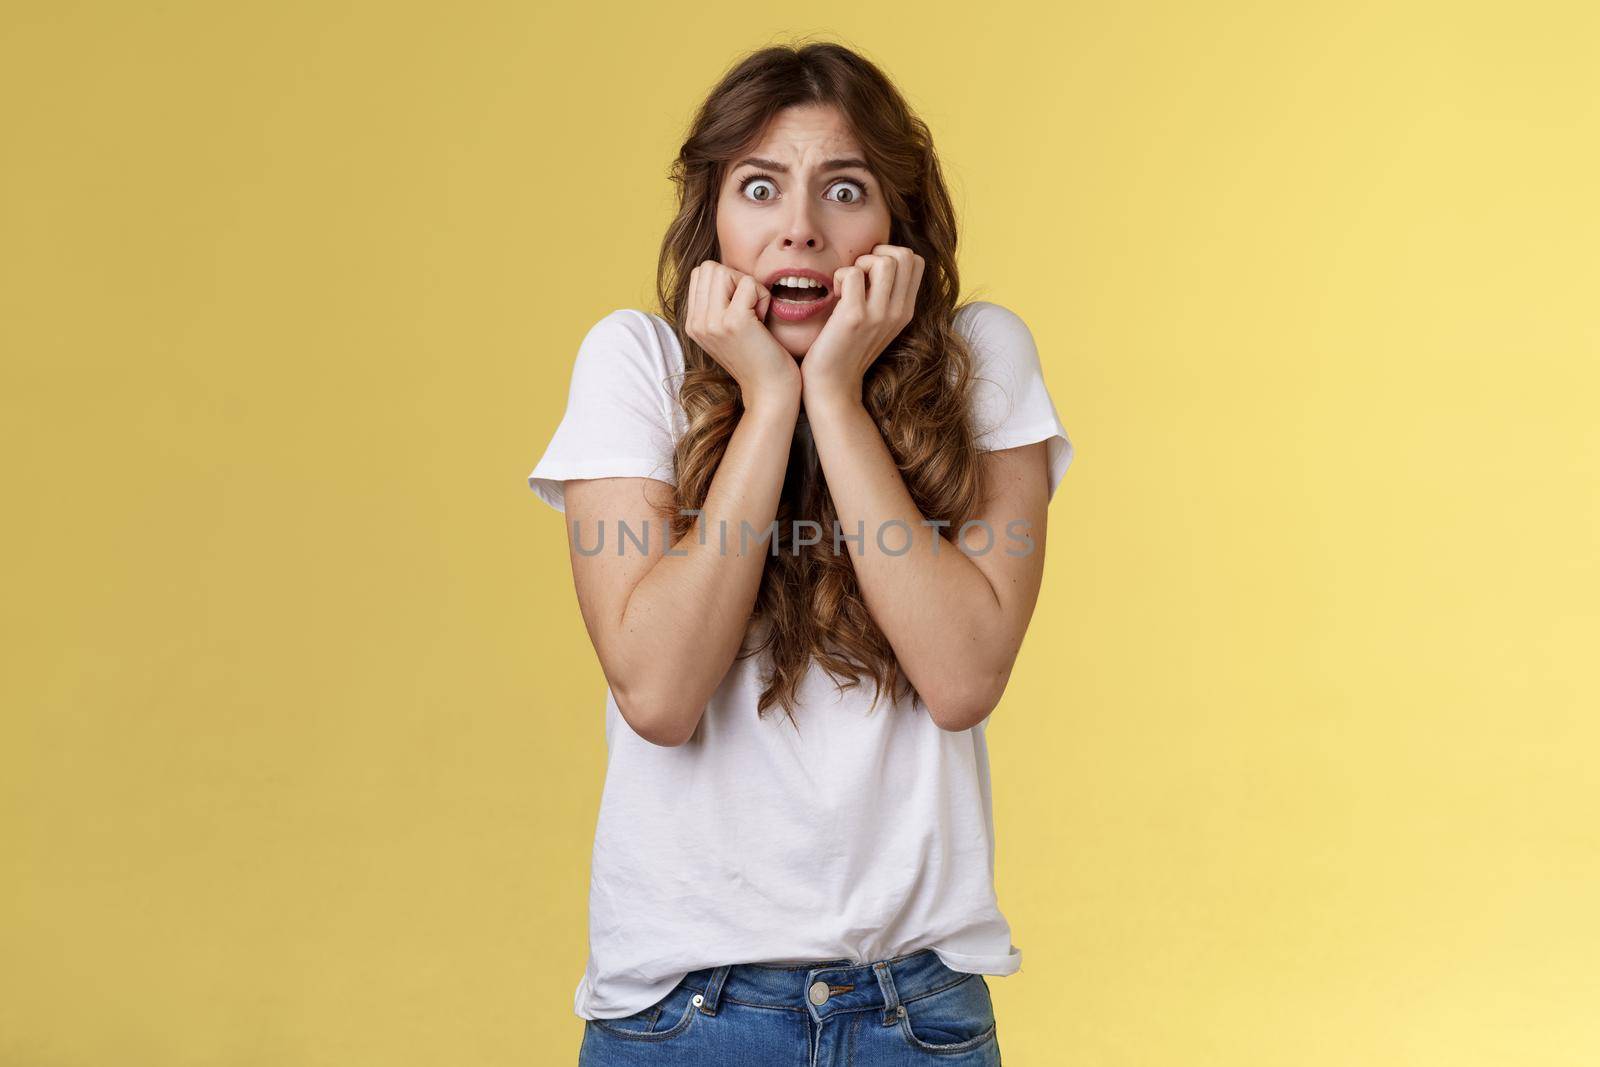 Timid insecure intense gasping young scared attractive woman sighing shocked frightened hold hands face biting nails terrified express fear standing shook yellow background stare camera.